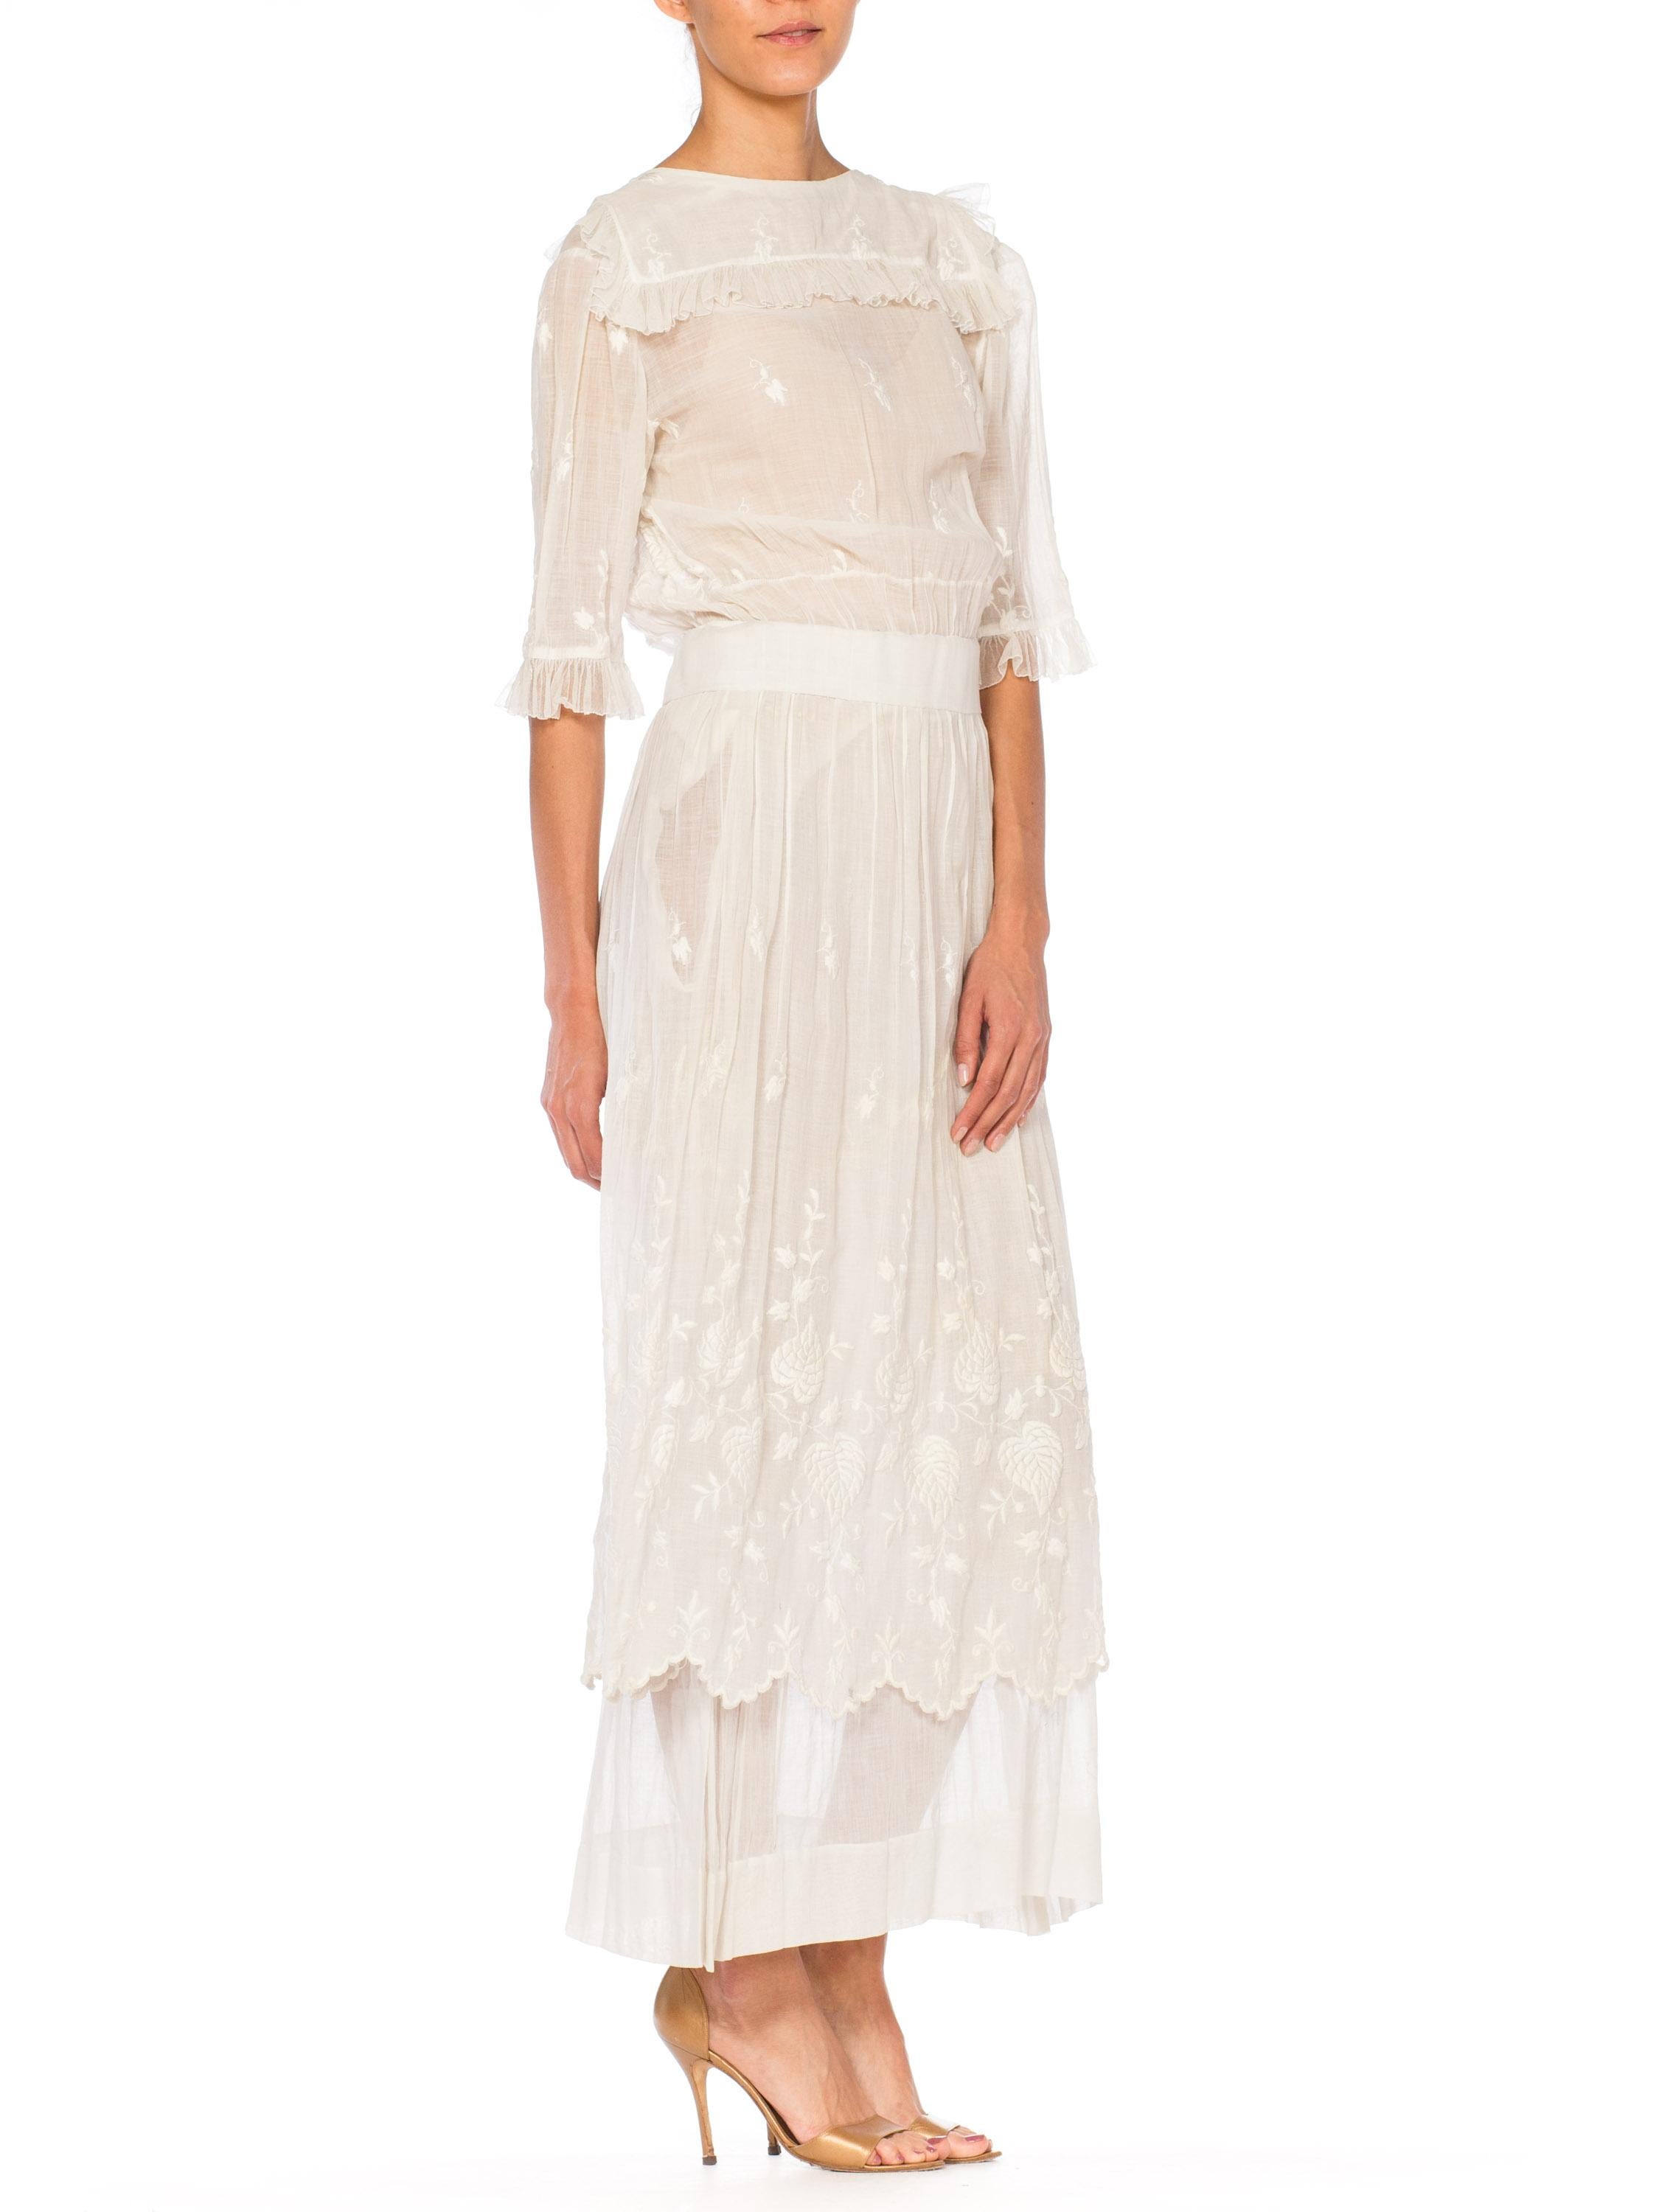 1910S White Embroidered Cotton Voile Edwardian Tea Dress With Sleeves For Sale 5